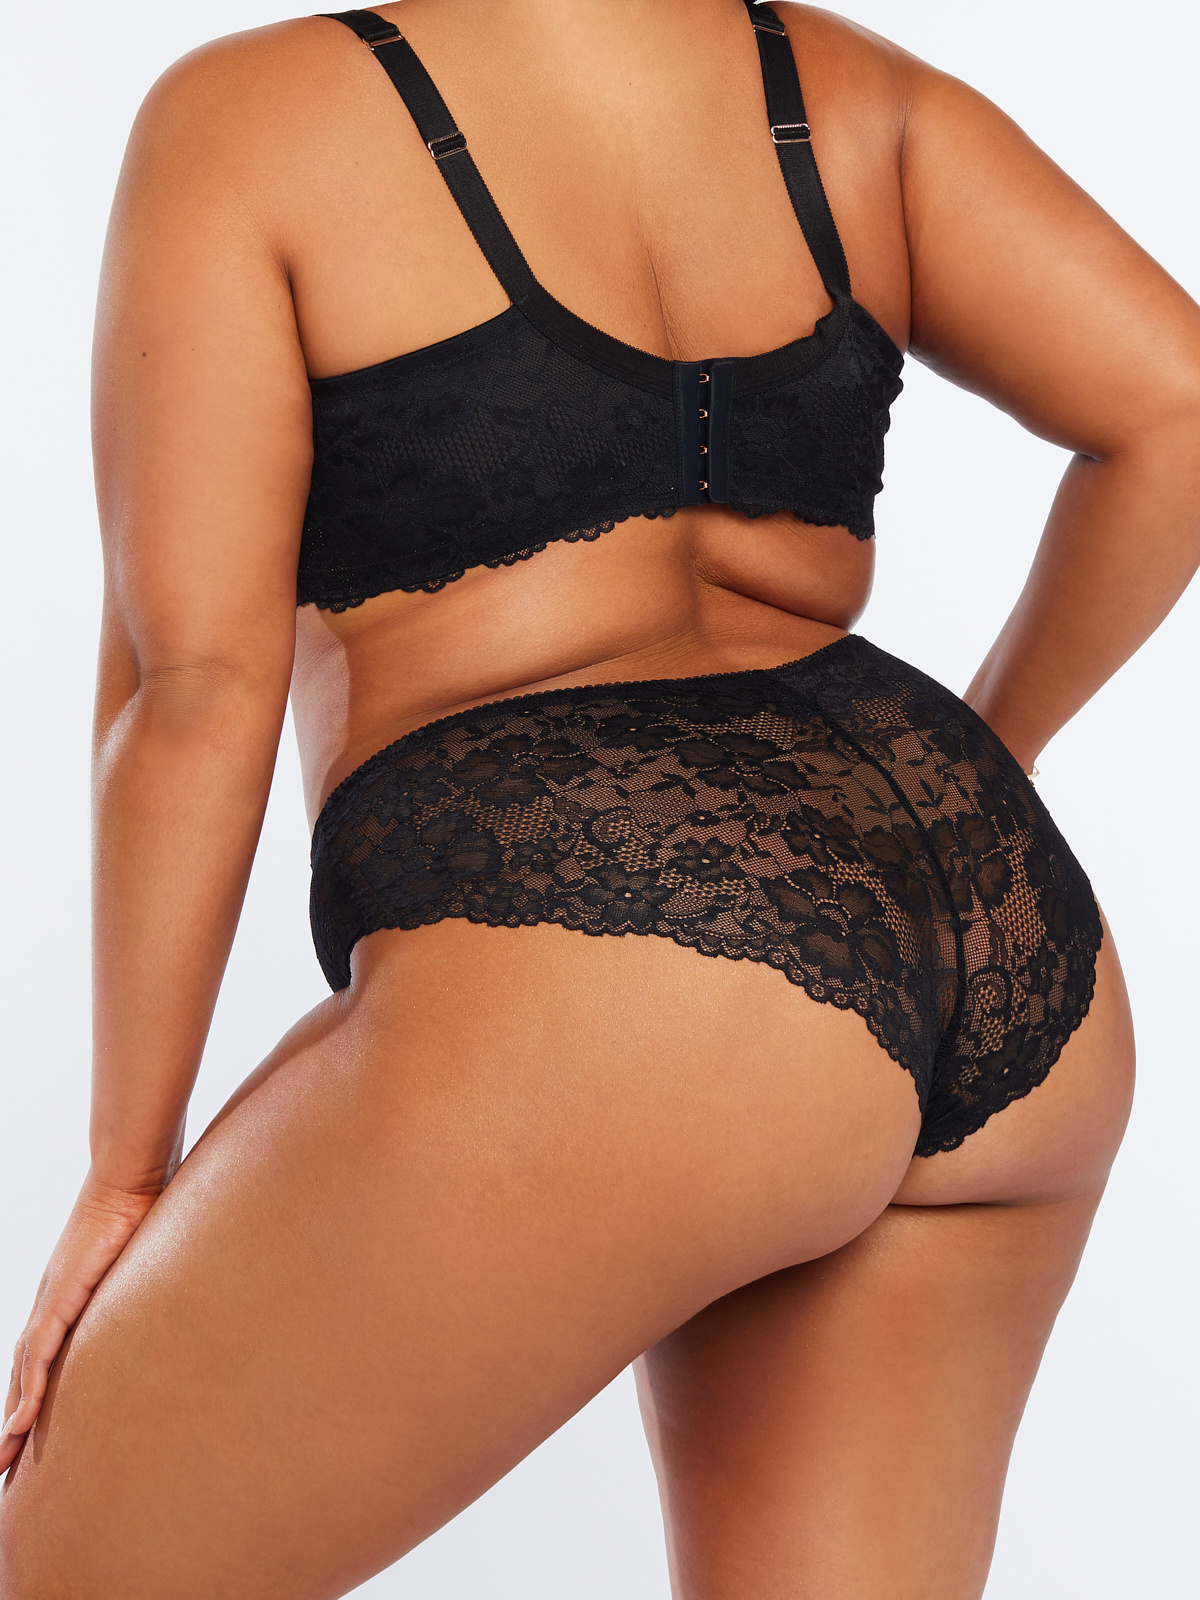 Floral Lace Cheeky Panty in Black